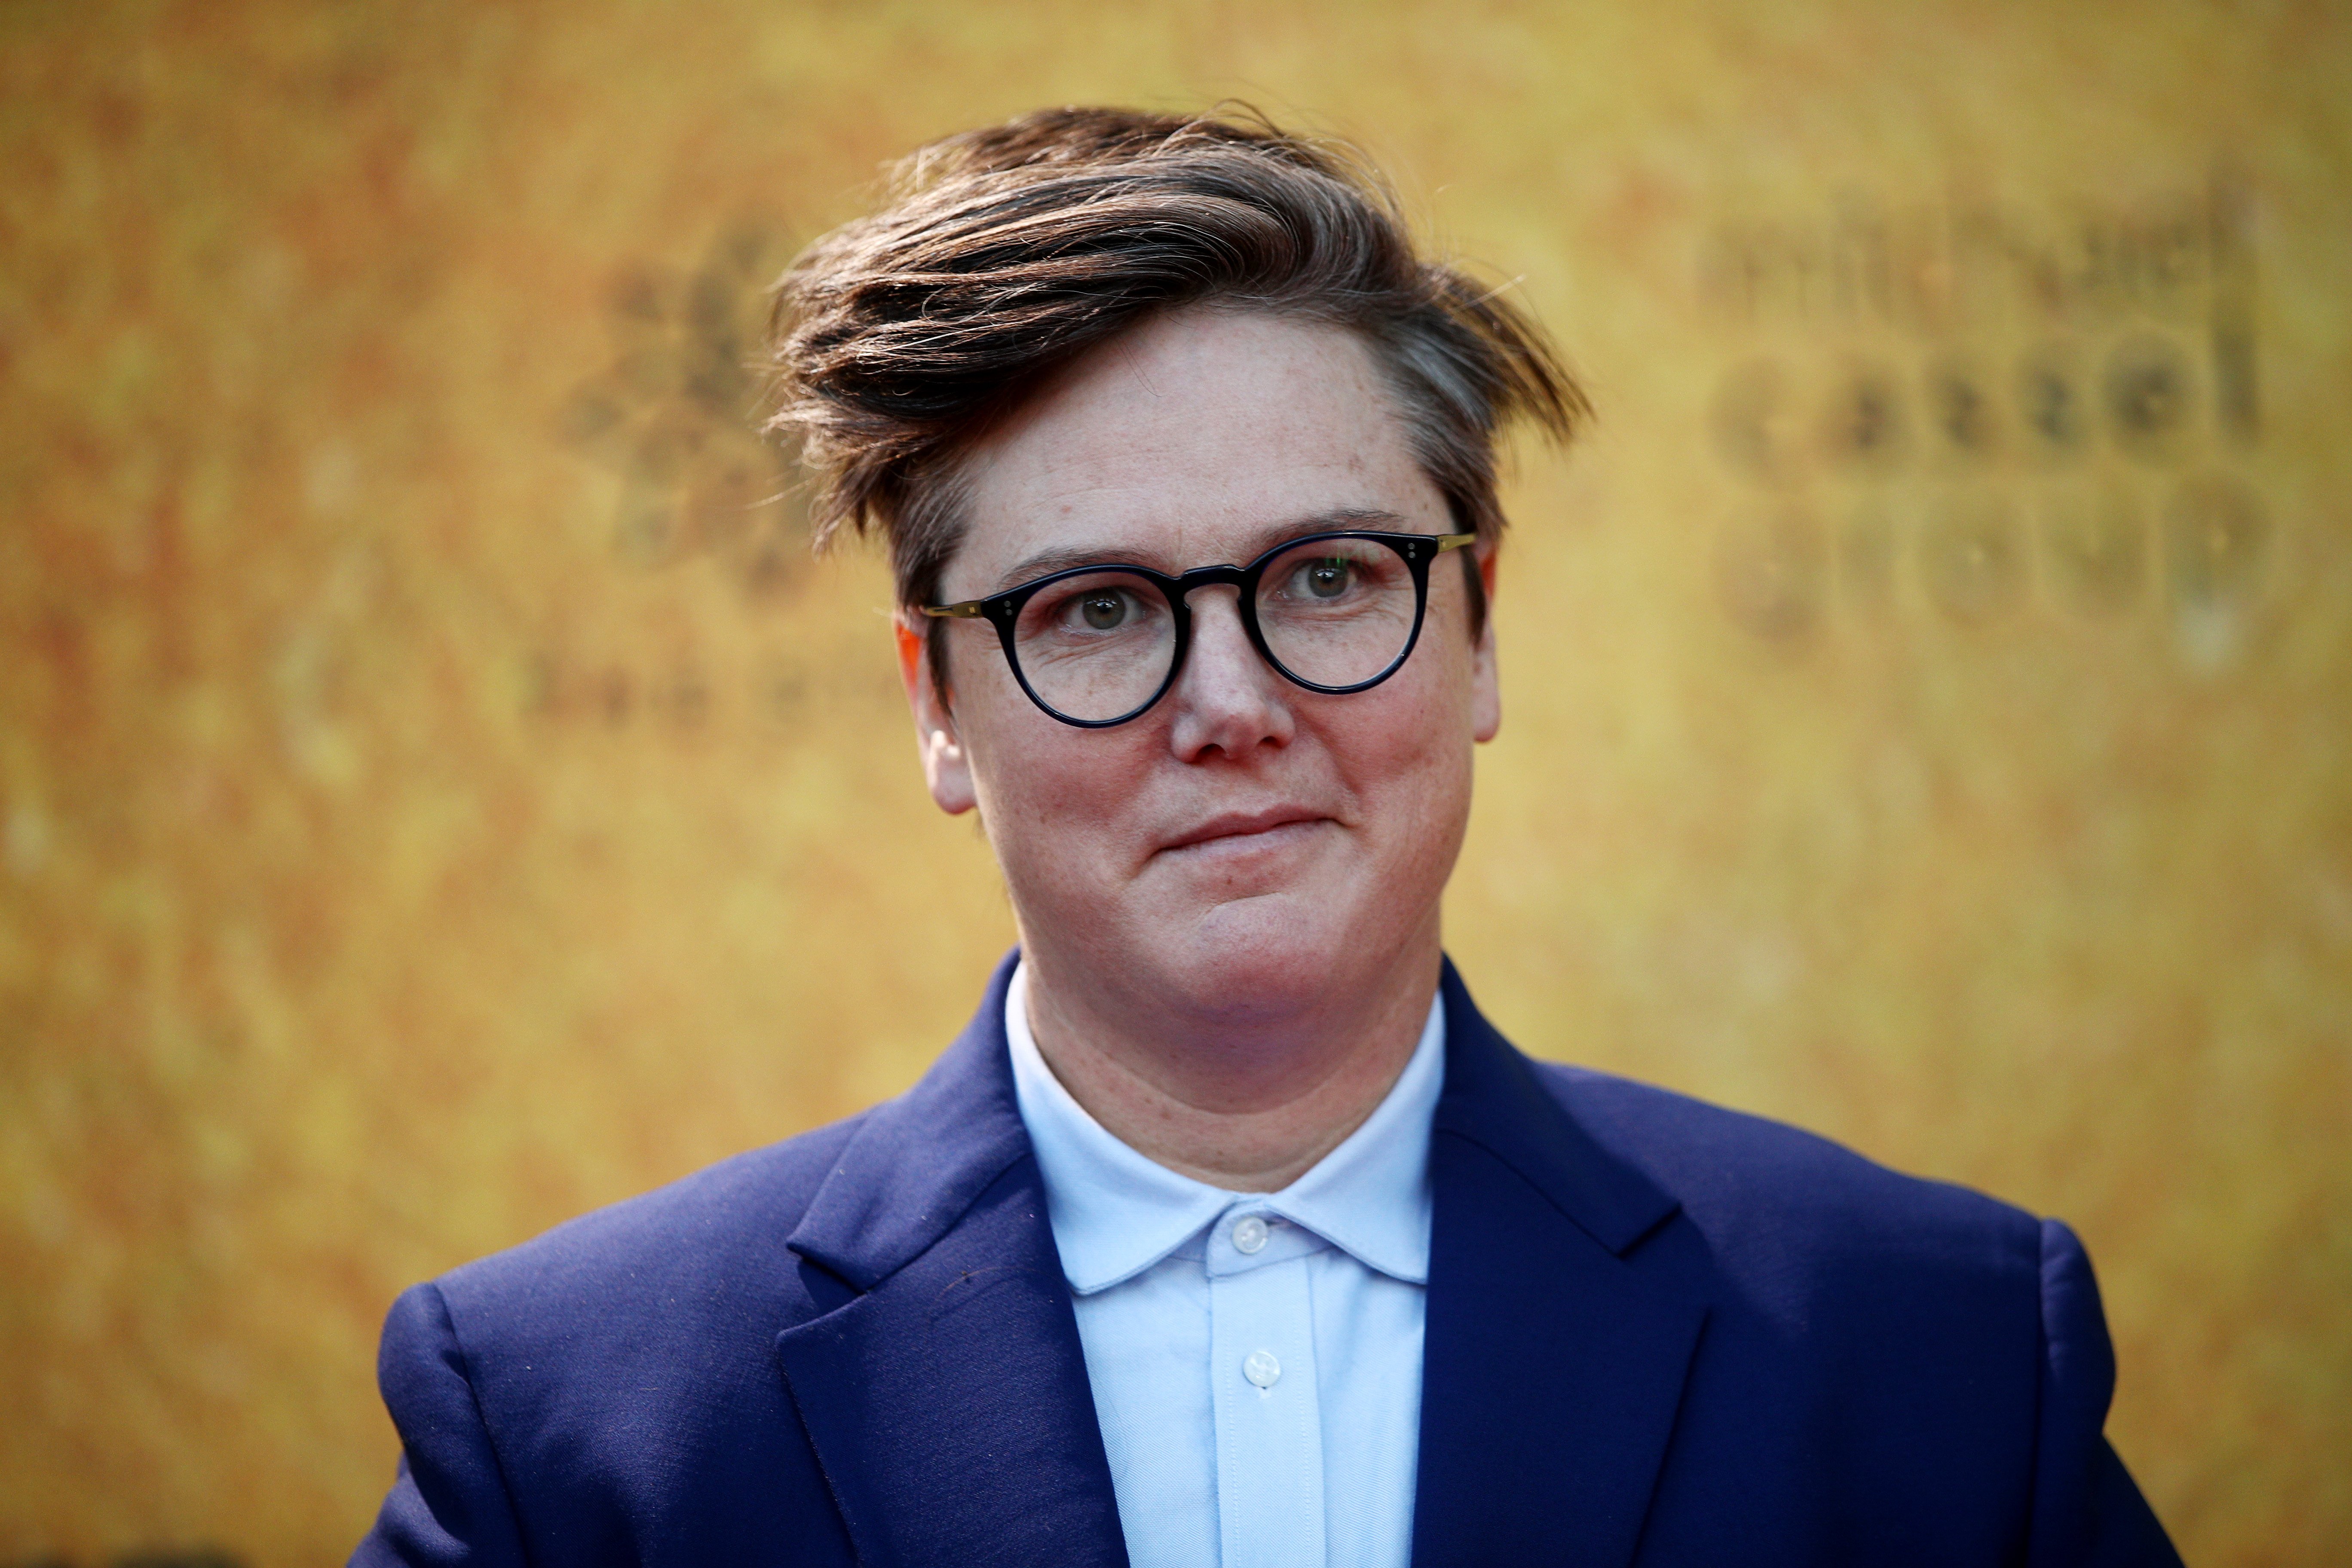 Hannah Gadsby attends the premiere of Hamilton at Lyric Theatre, Star City on March 27, 2021, in Sydney, Australia. | Source: Getty Images